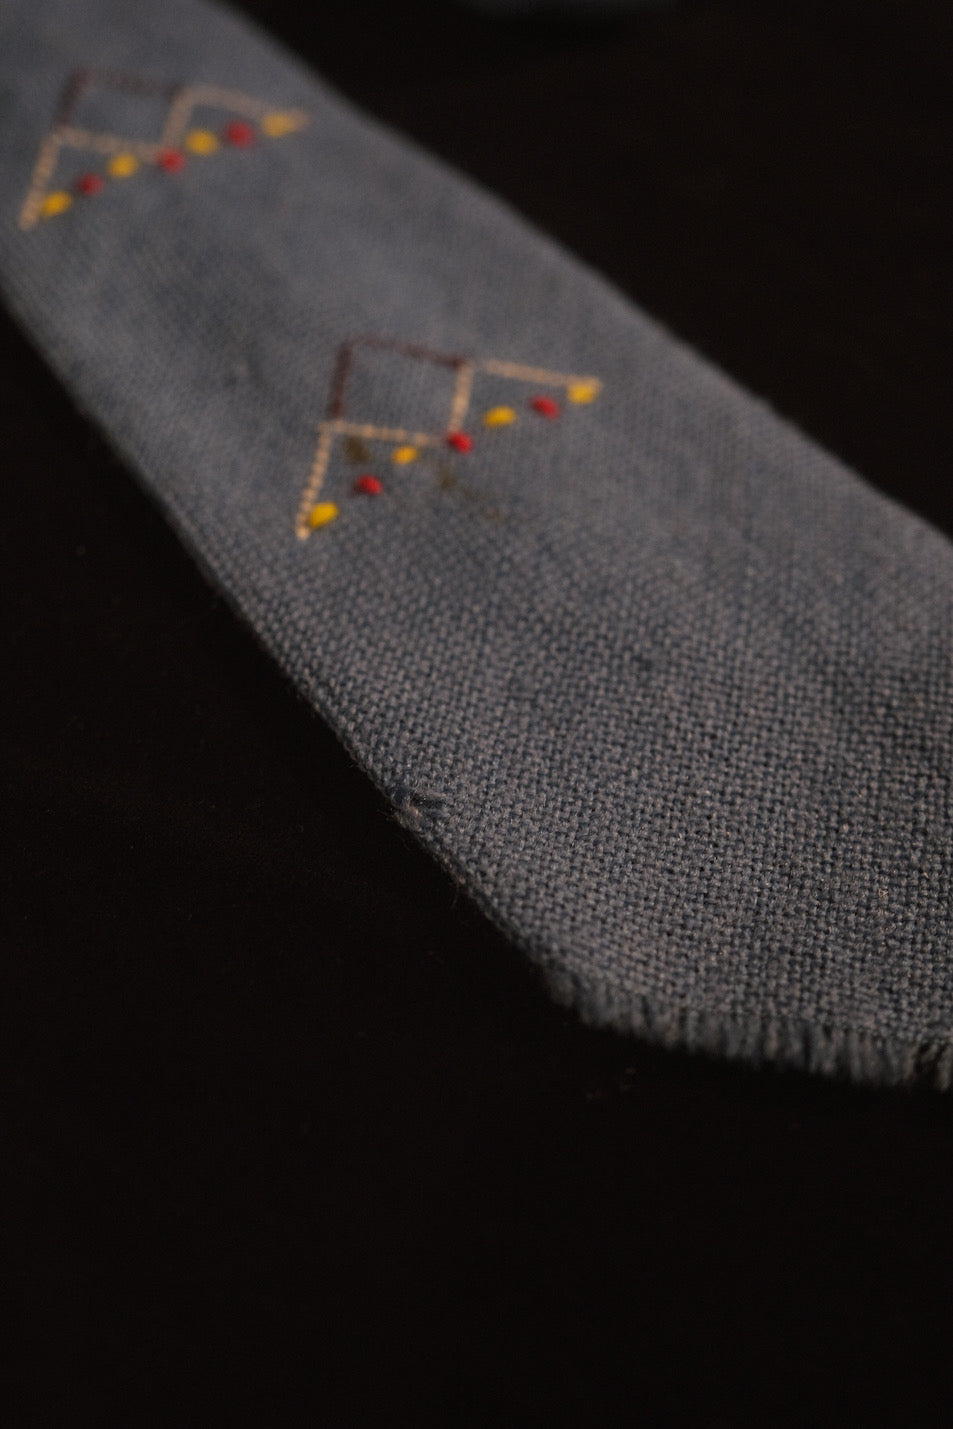 Light Blue Pyramid Embroidered Native American Tie By Indian Cravats, Santa Fe